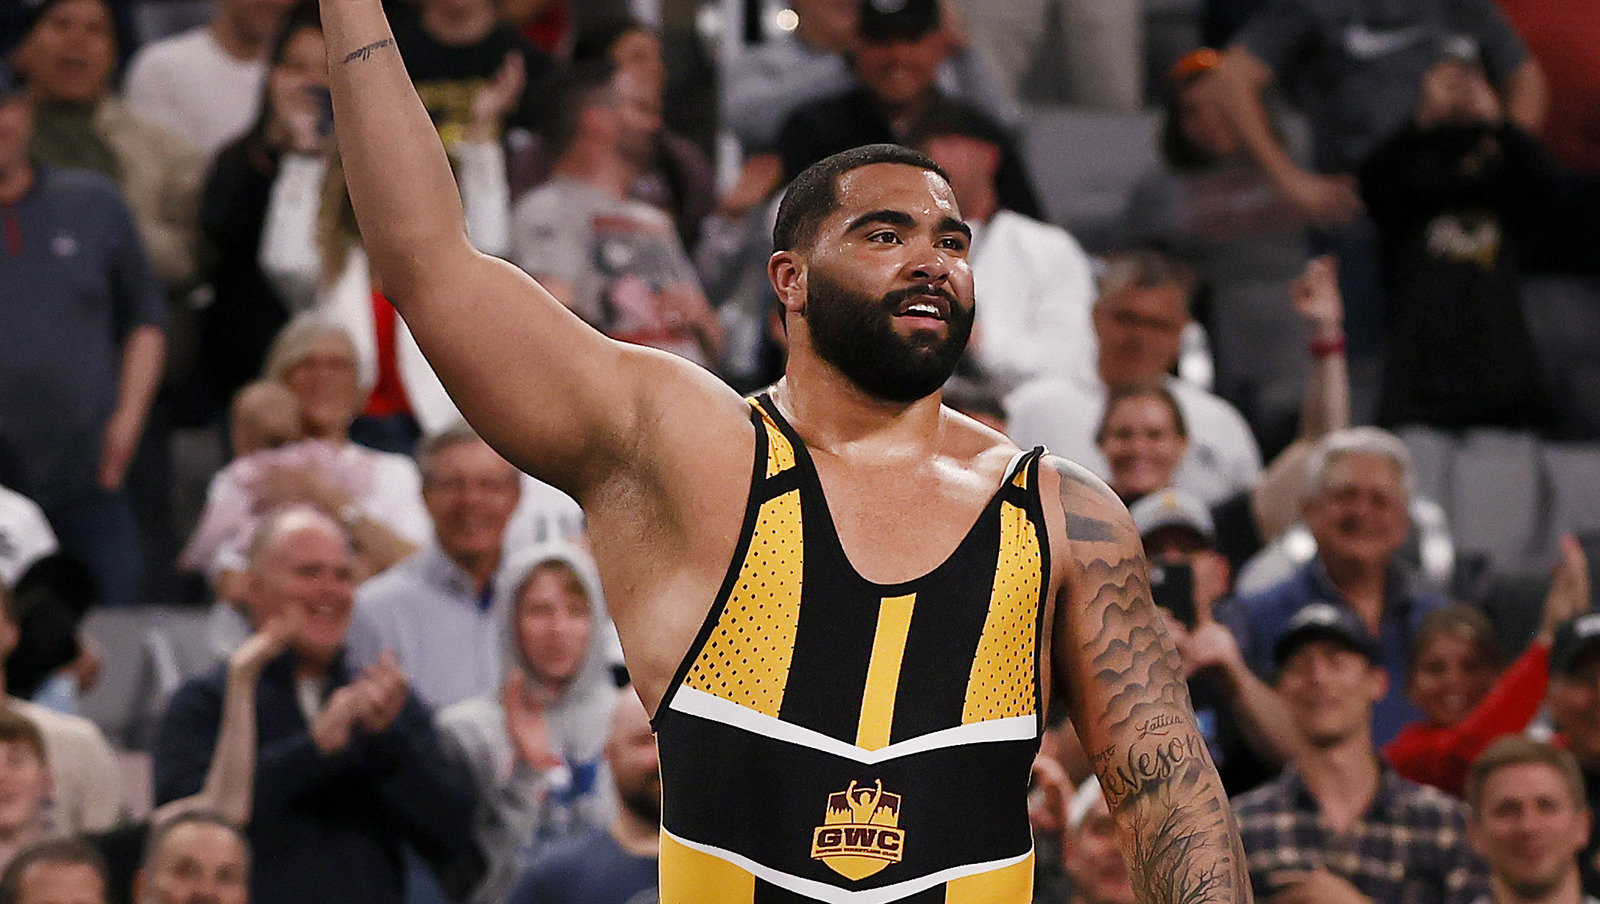 WWE Reportedly Releases Controversial Olympic Gold Medalist Gable Steveson